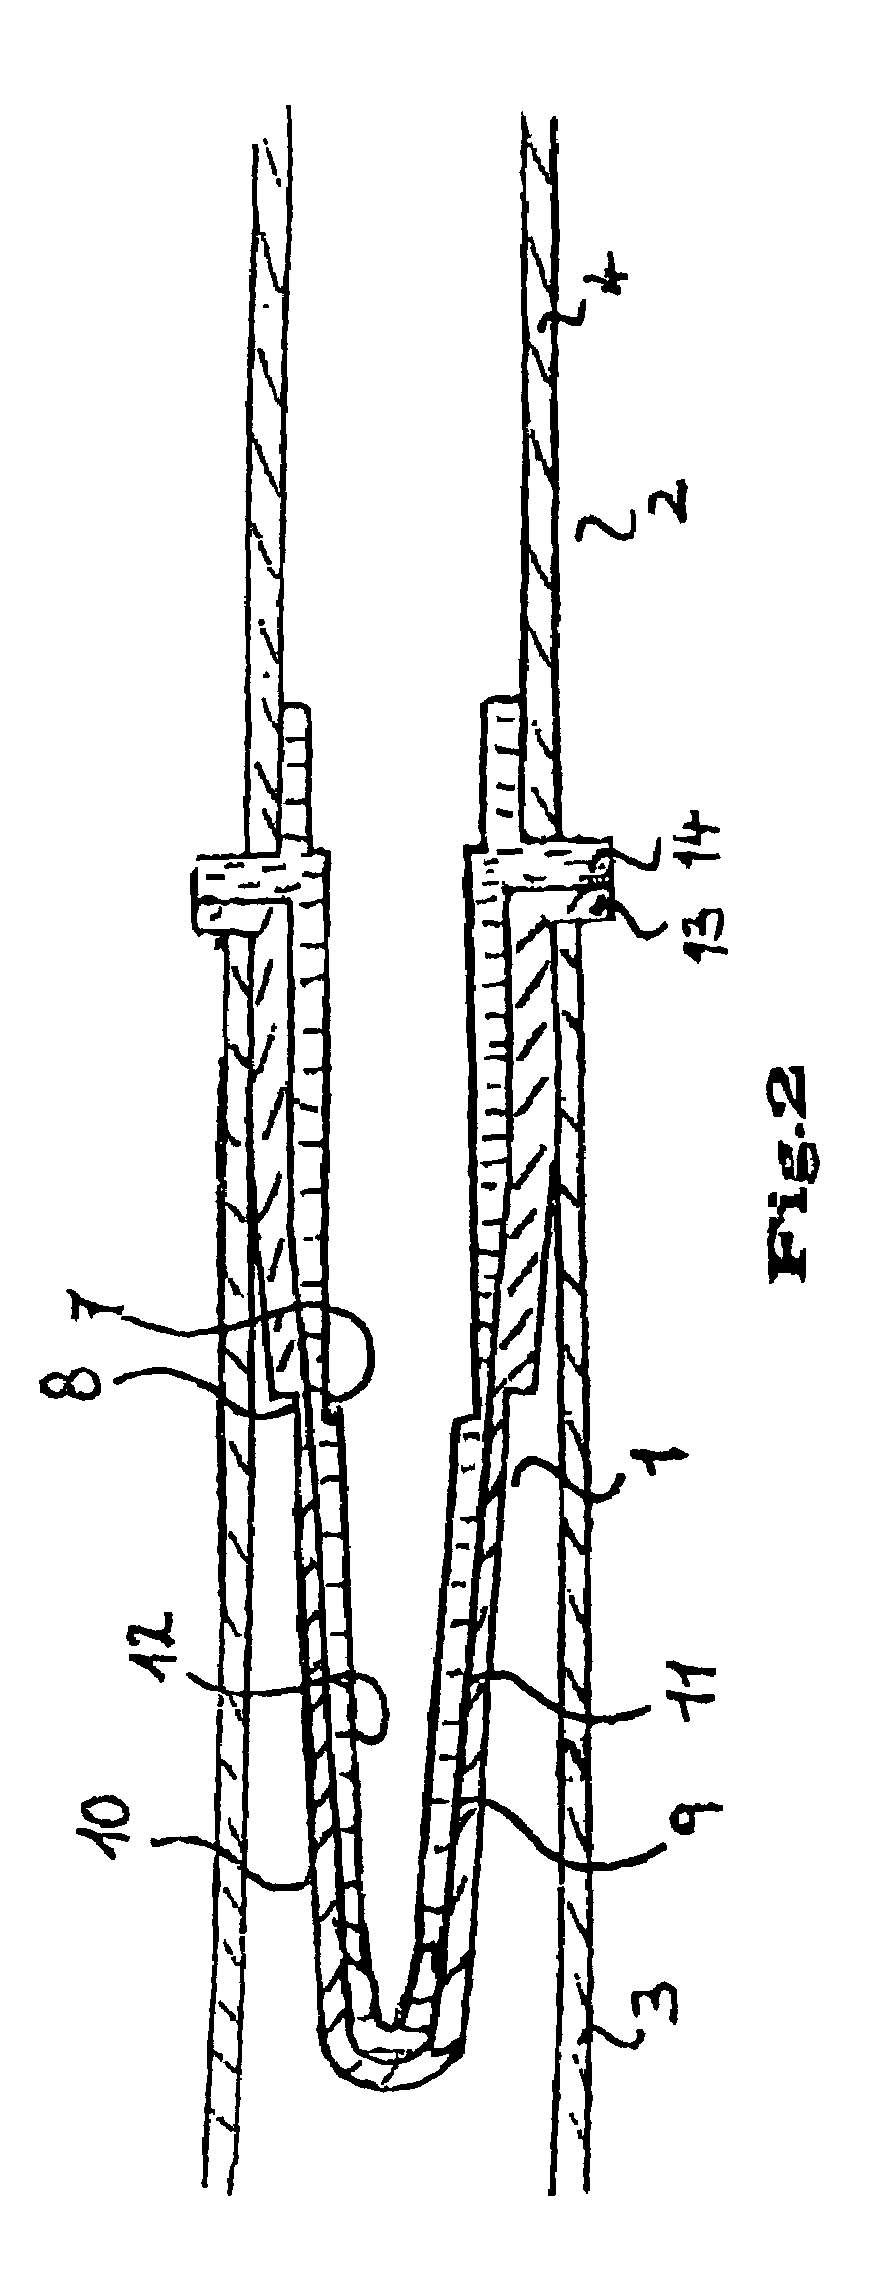 Sterility-maintaining connection system for medical systems and use thereof